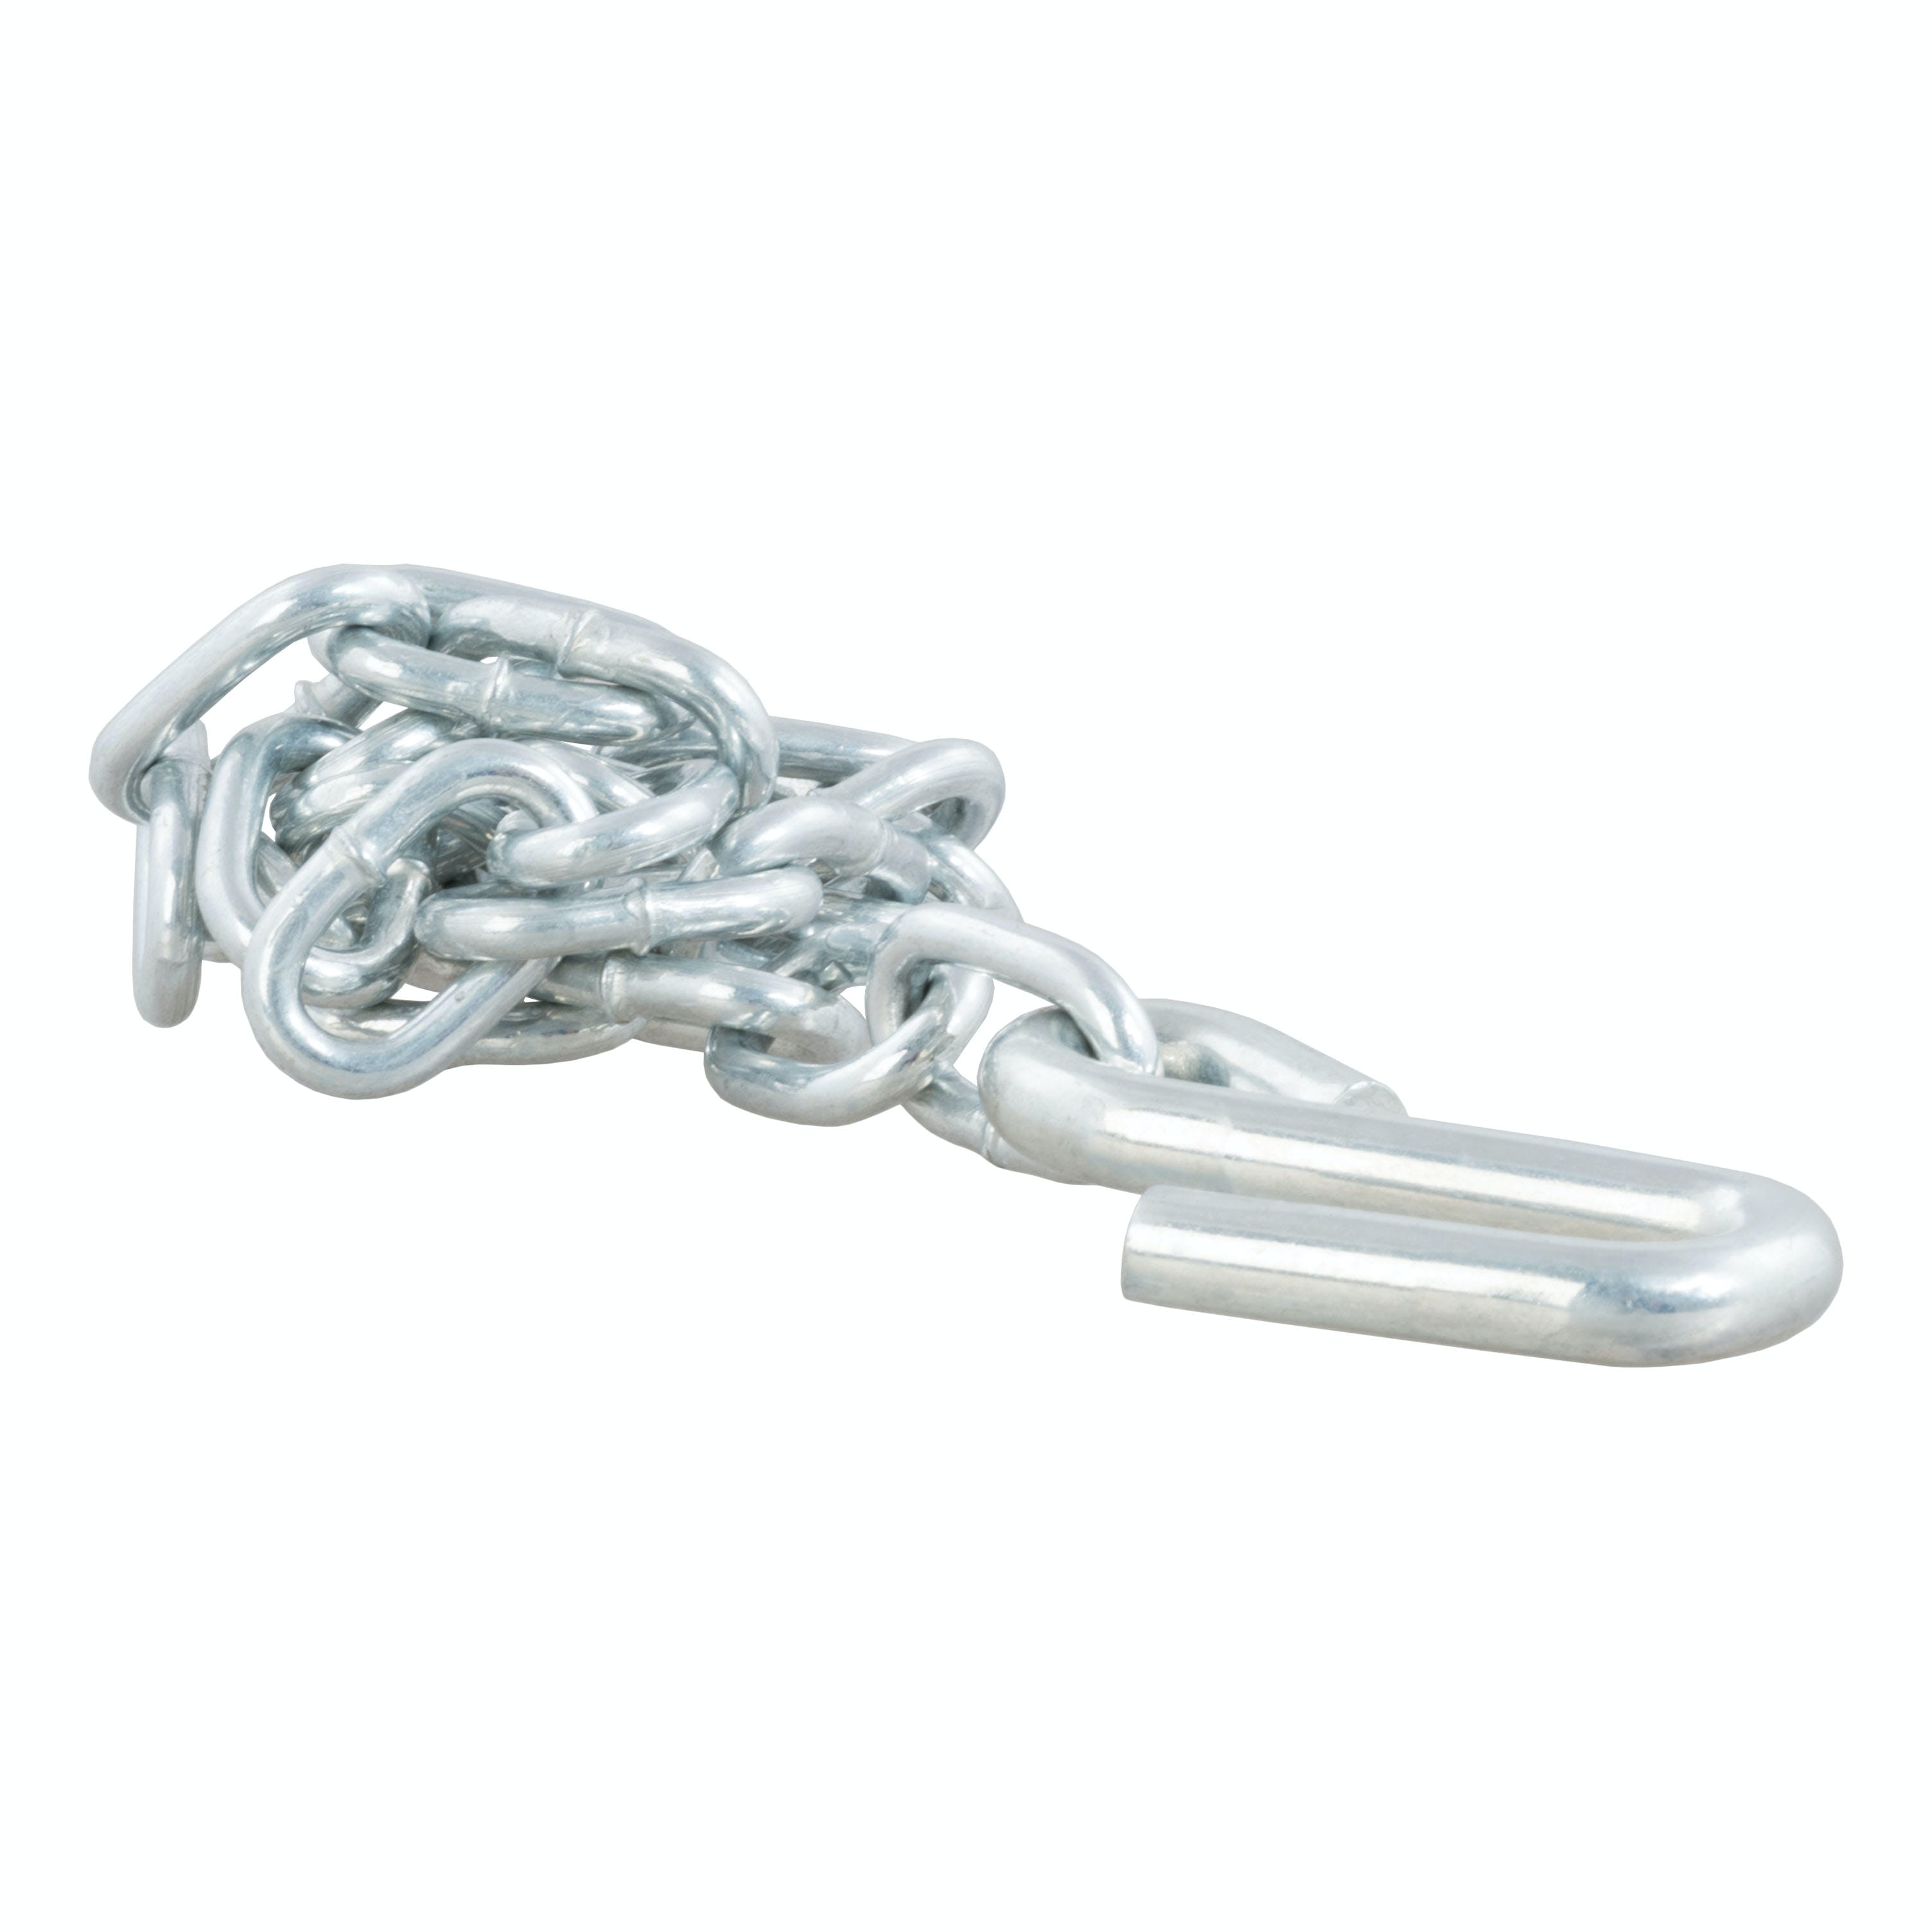 CURT 80020 27 Safety Chain with 1 S-Hook (2,000 lbs, Clear Zinc)